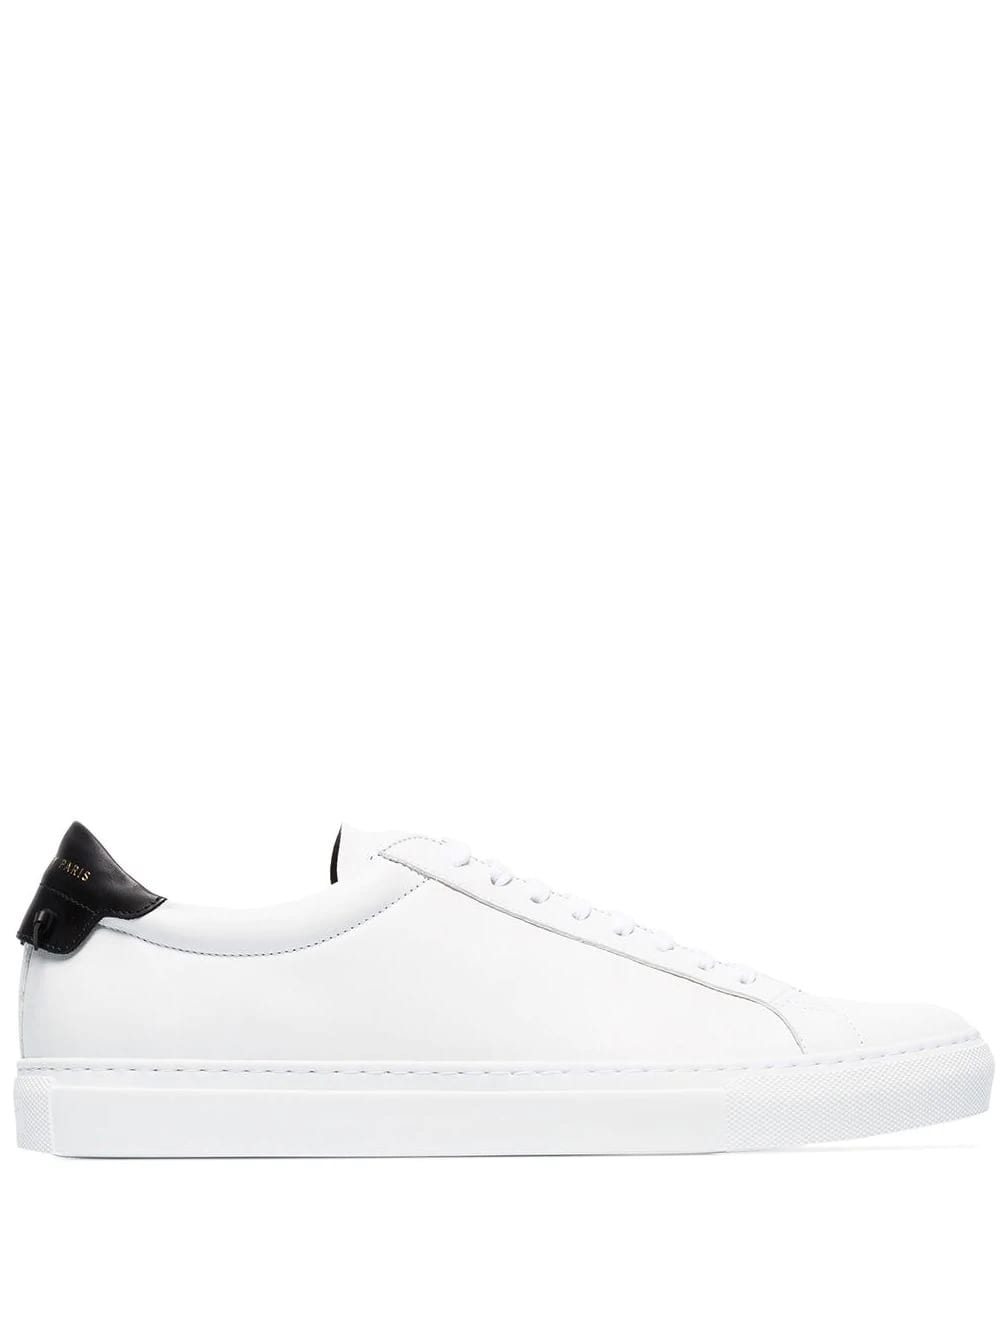 Givenchy Man White And Black Urban Street Sneakers